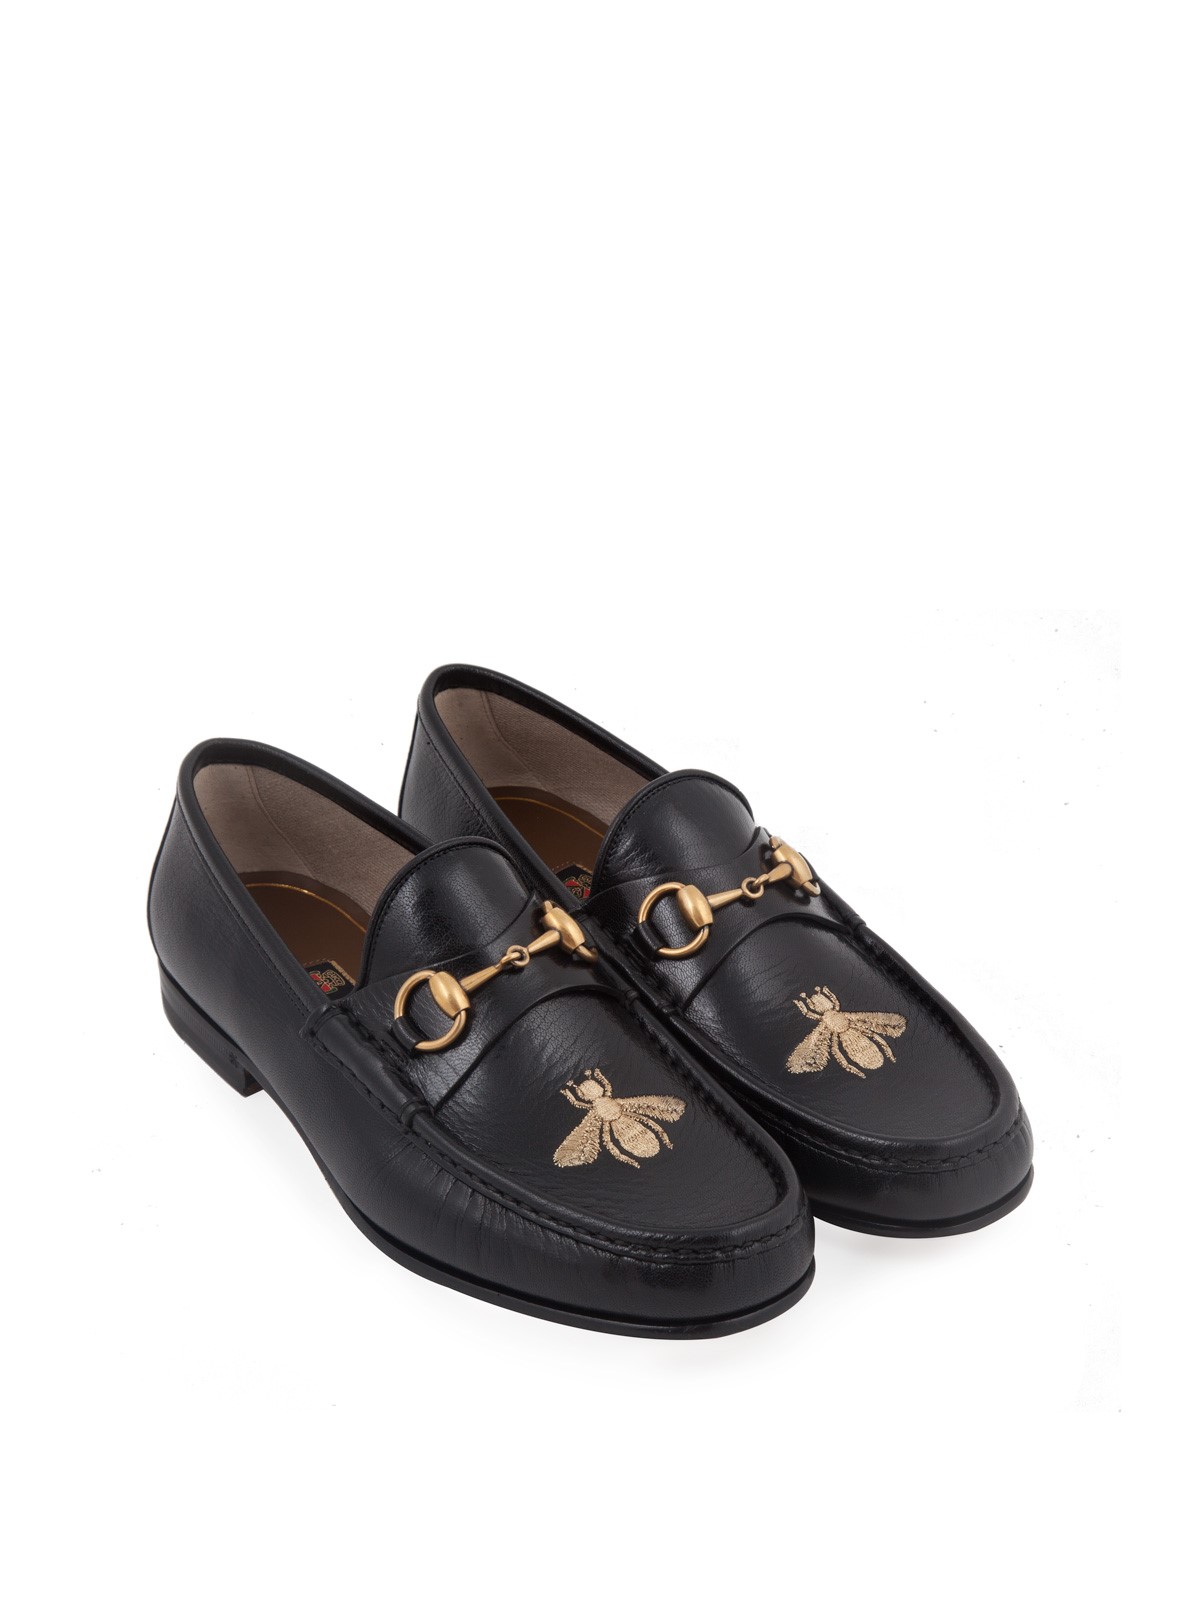 gucci embroidered loafers